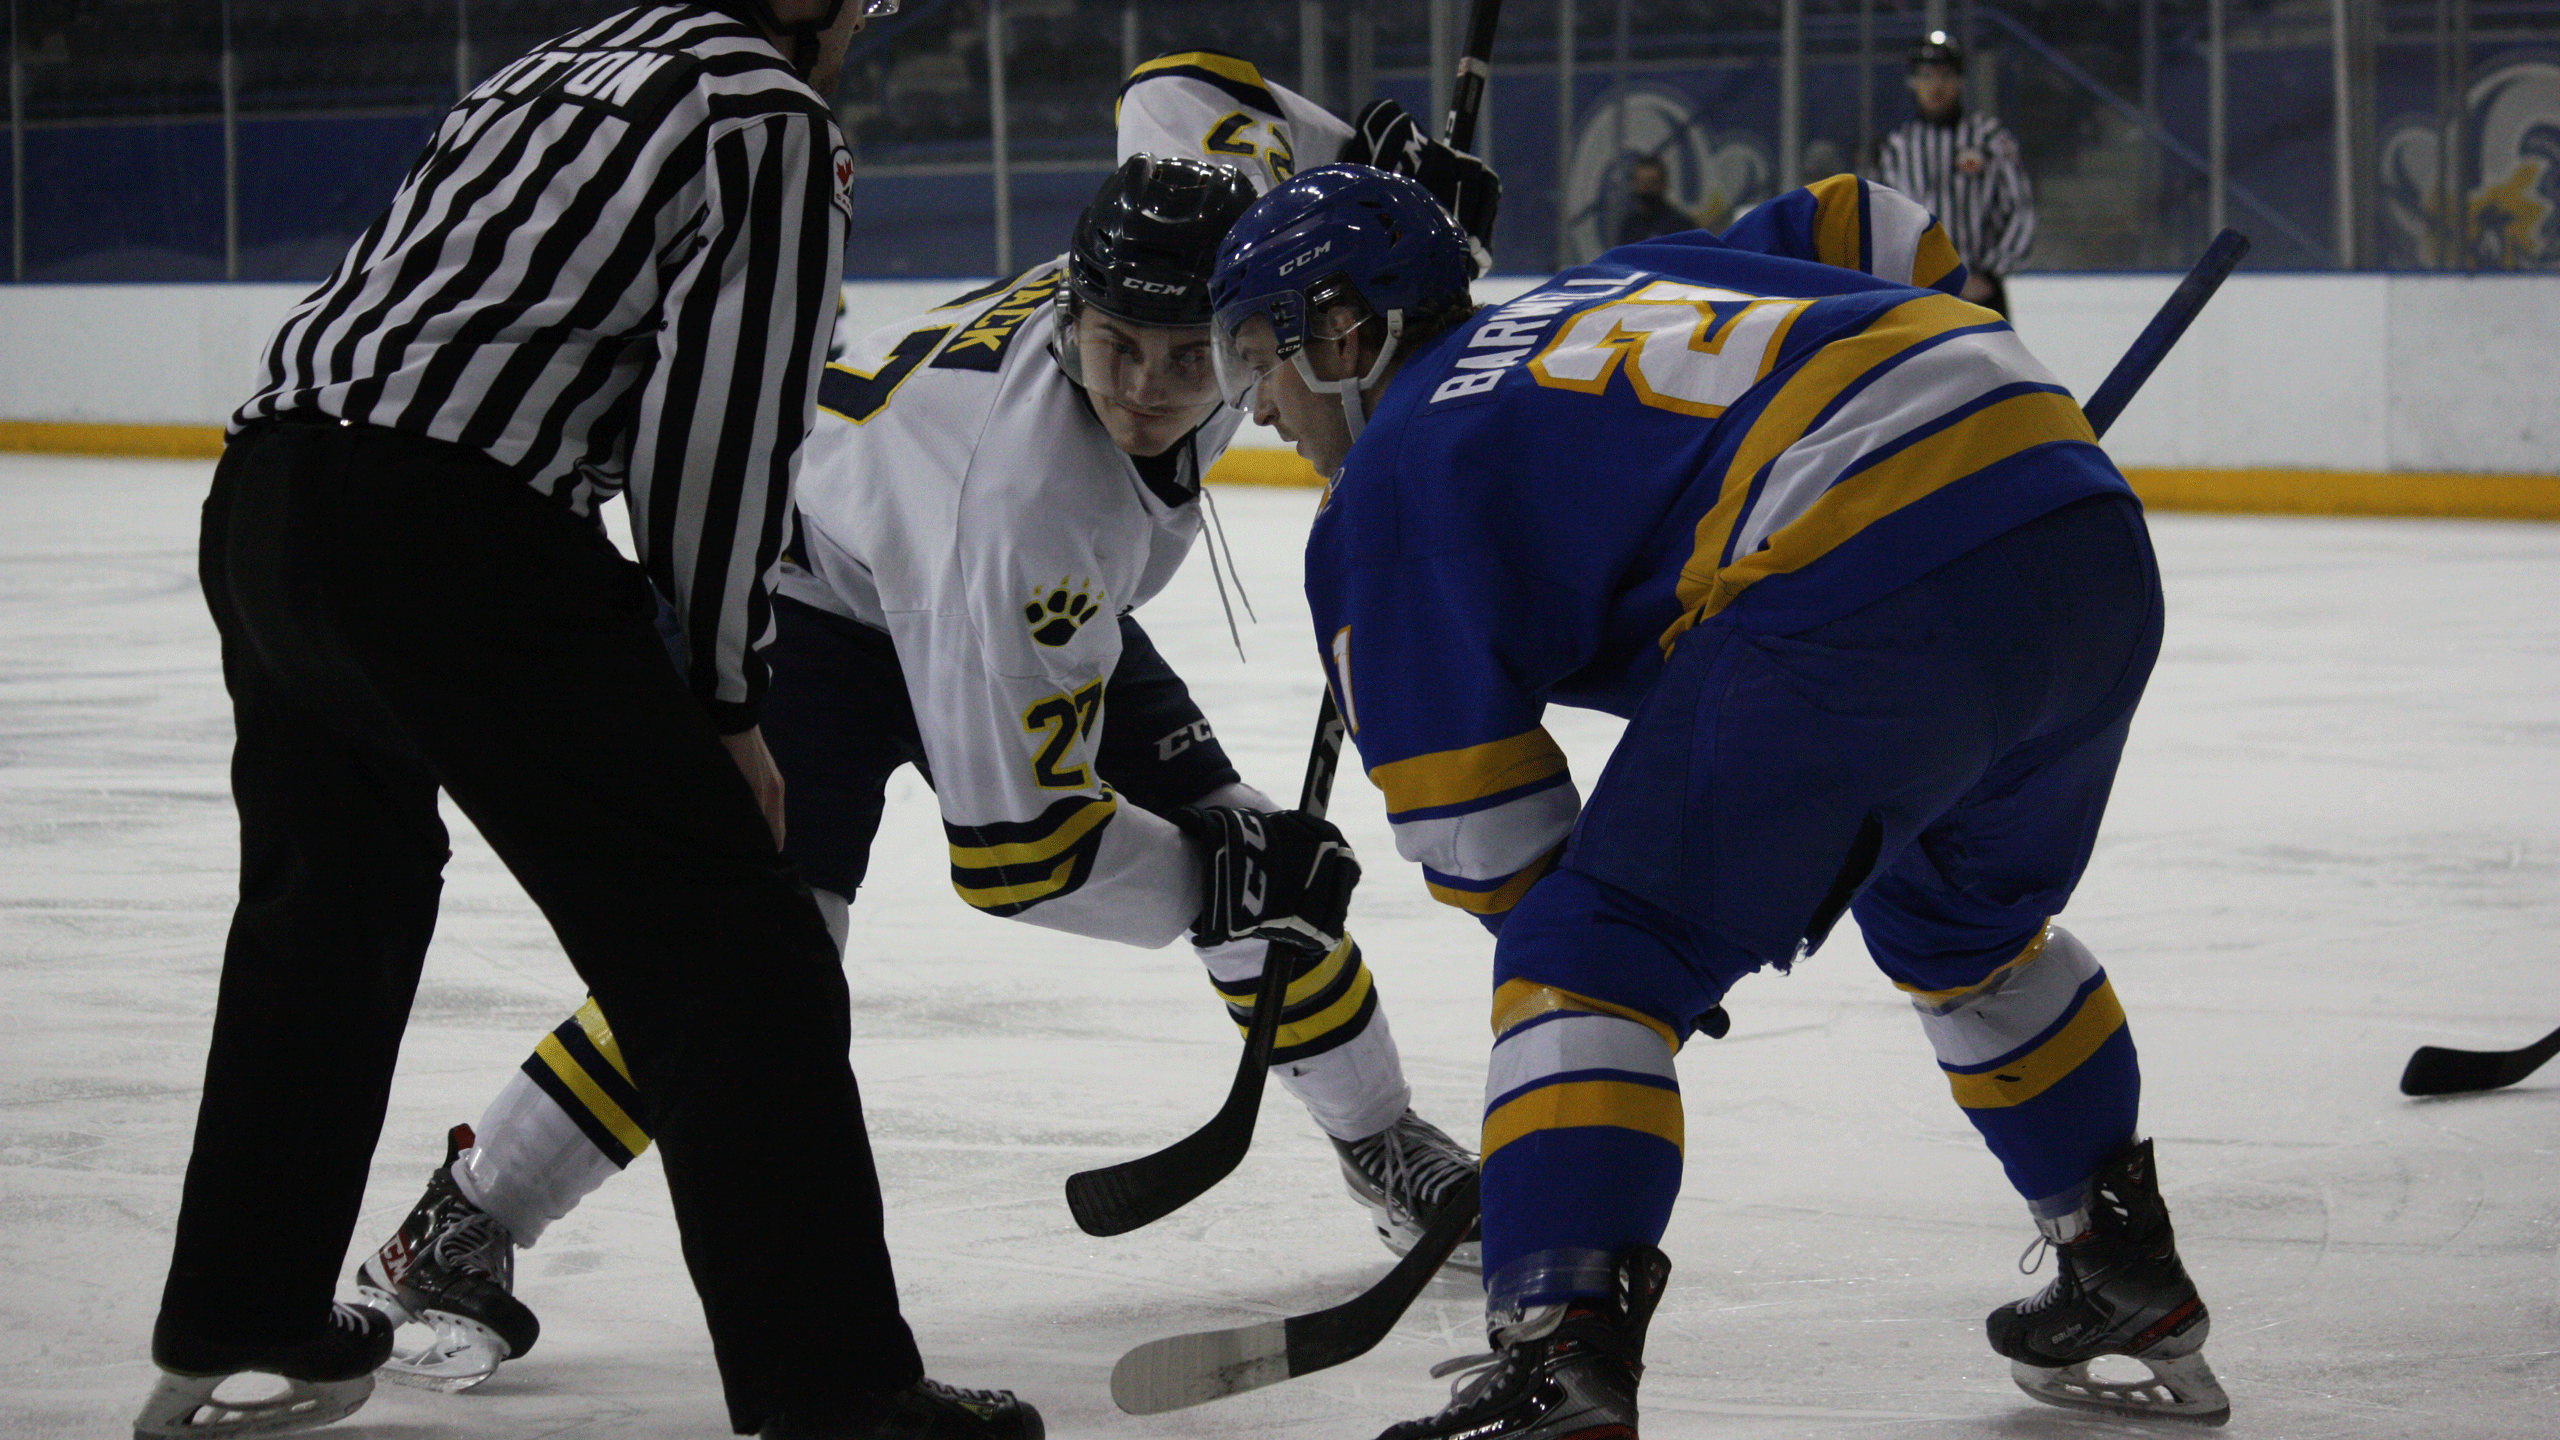 A Rams men's hockey player in a blue jersey takes a face-off